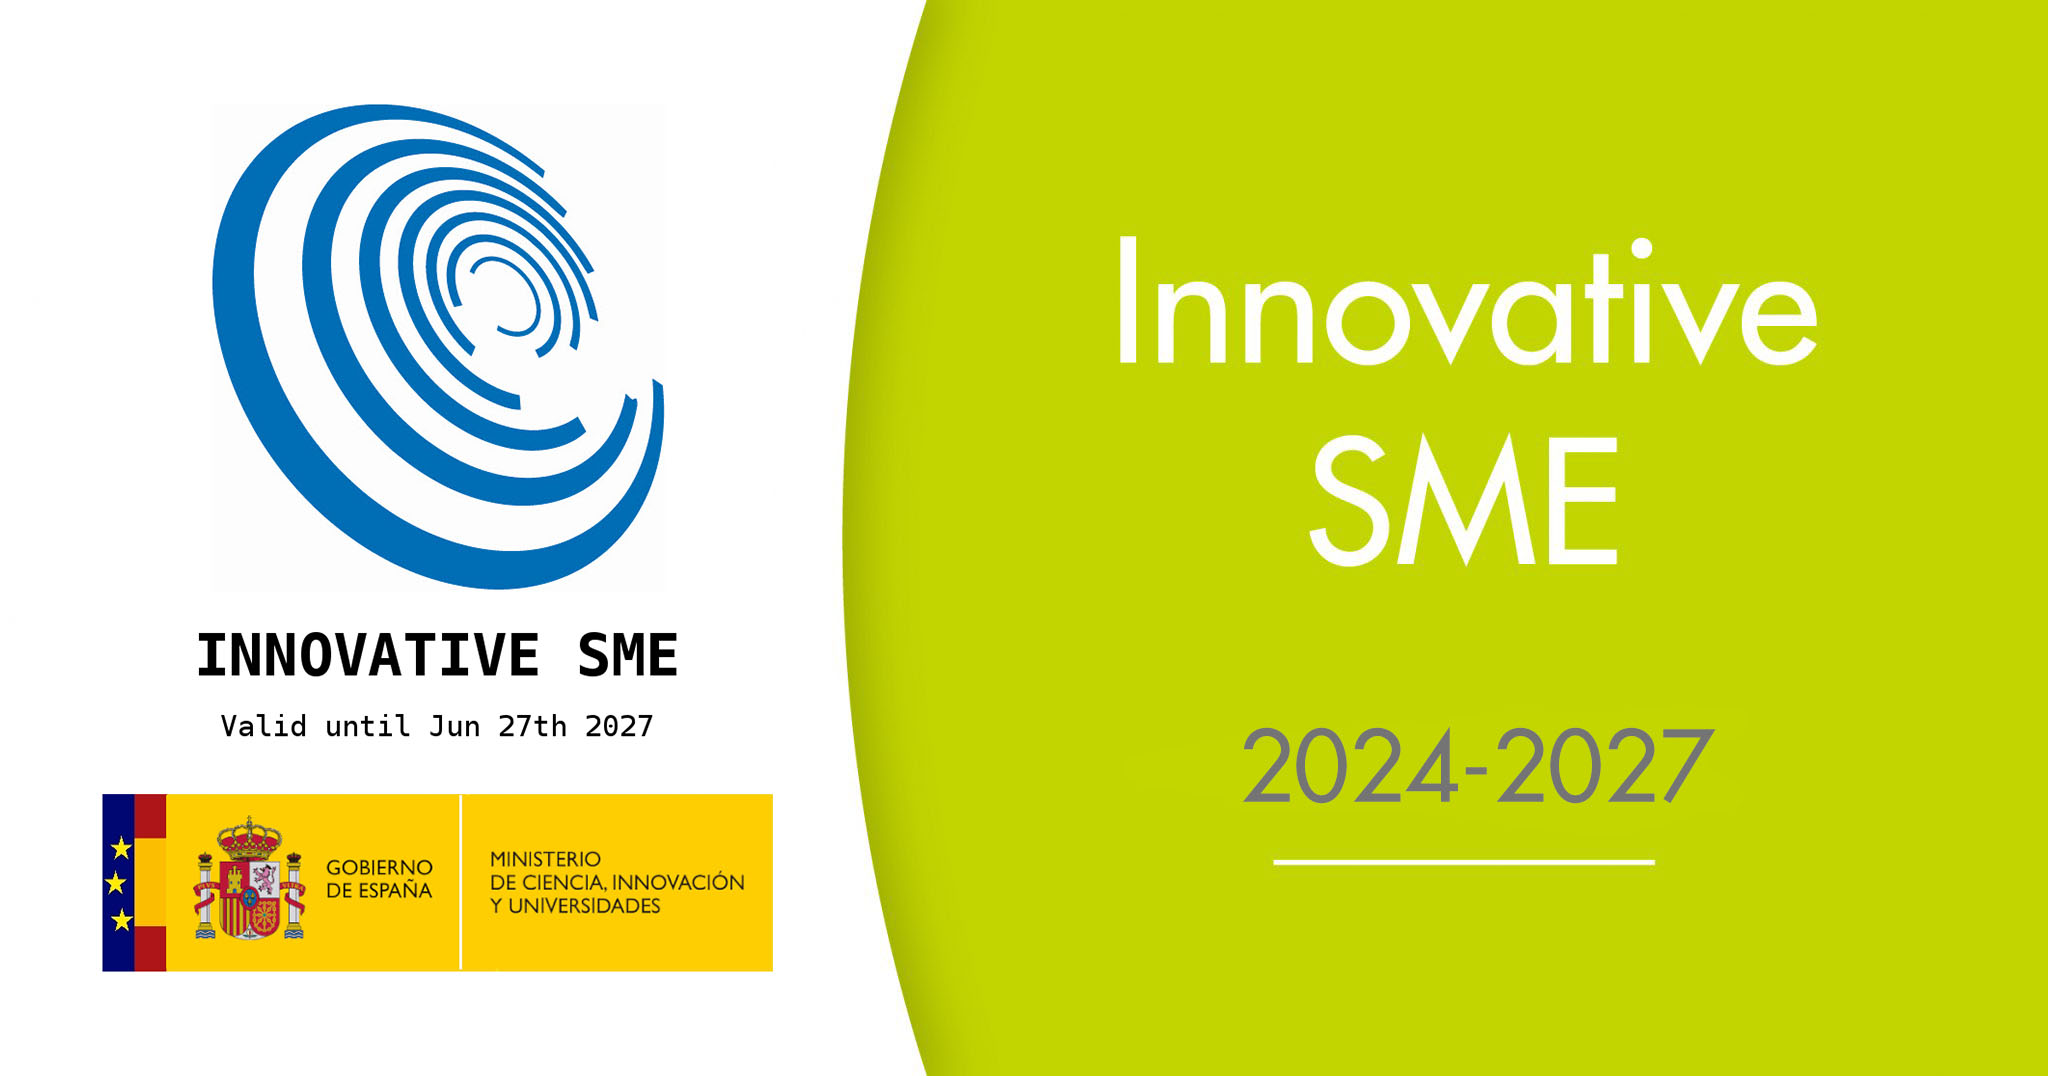 GalChimia has just renewed its Seal of Innovative SME